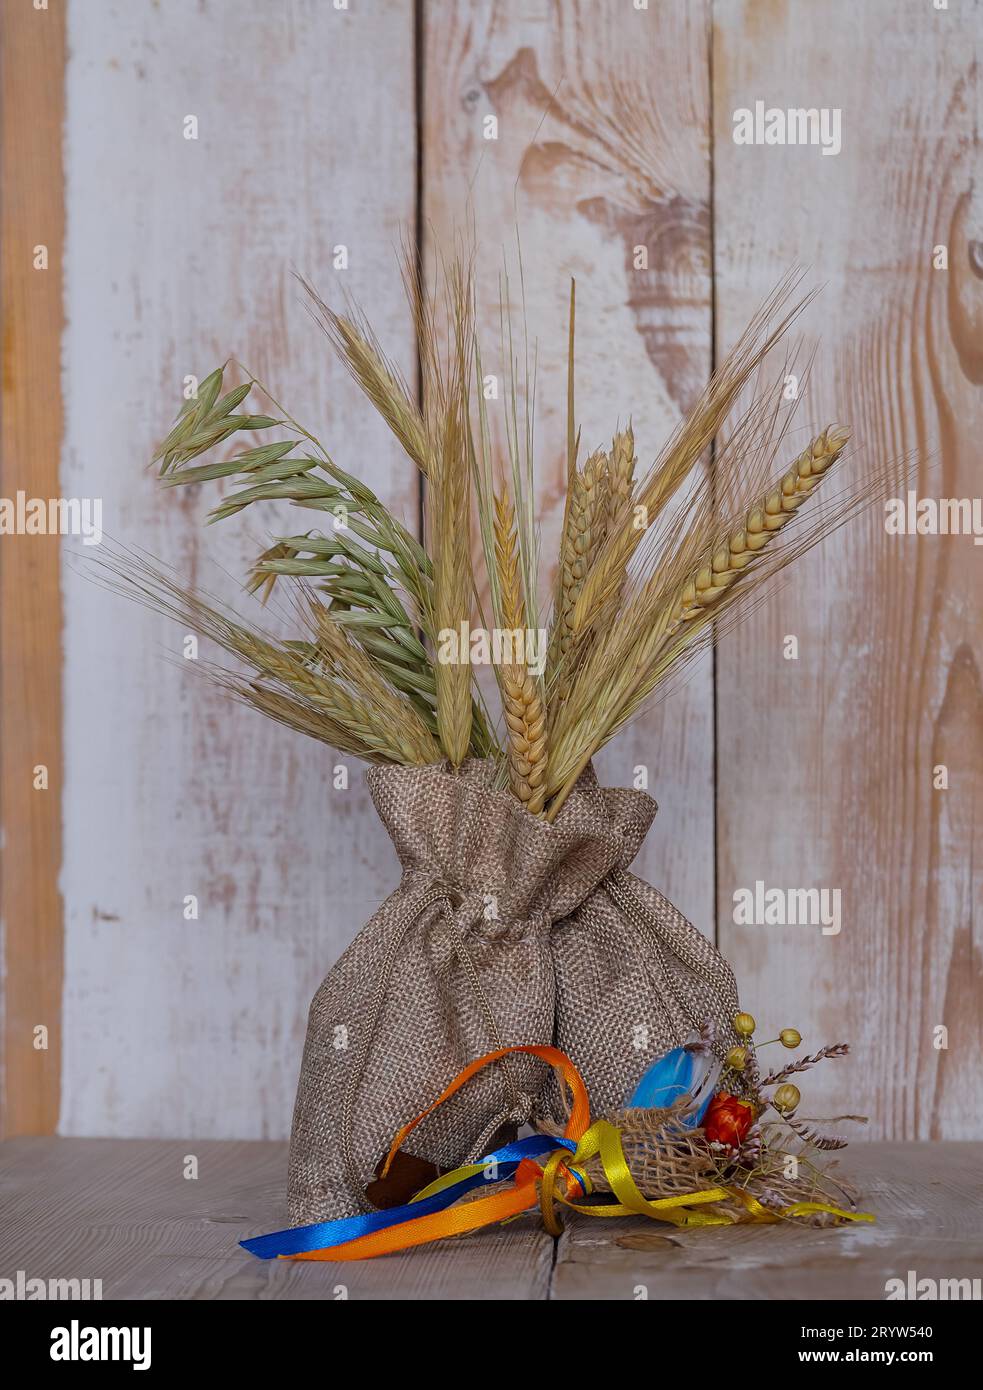 ears of grain sticking out of a linen bag, a symbol of fertility and abundant harvests, an element of naturalness and simplicity. The boards give the Stock Photo